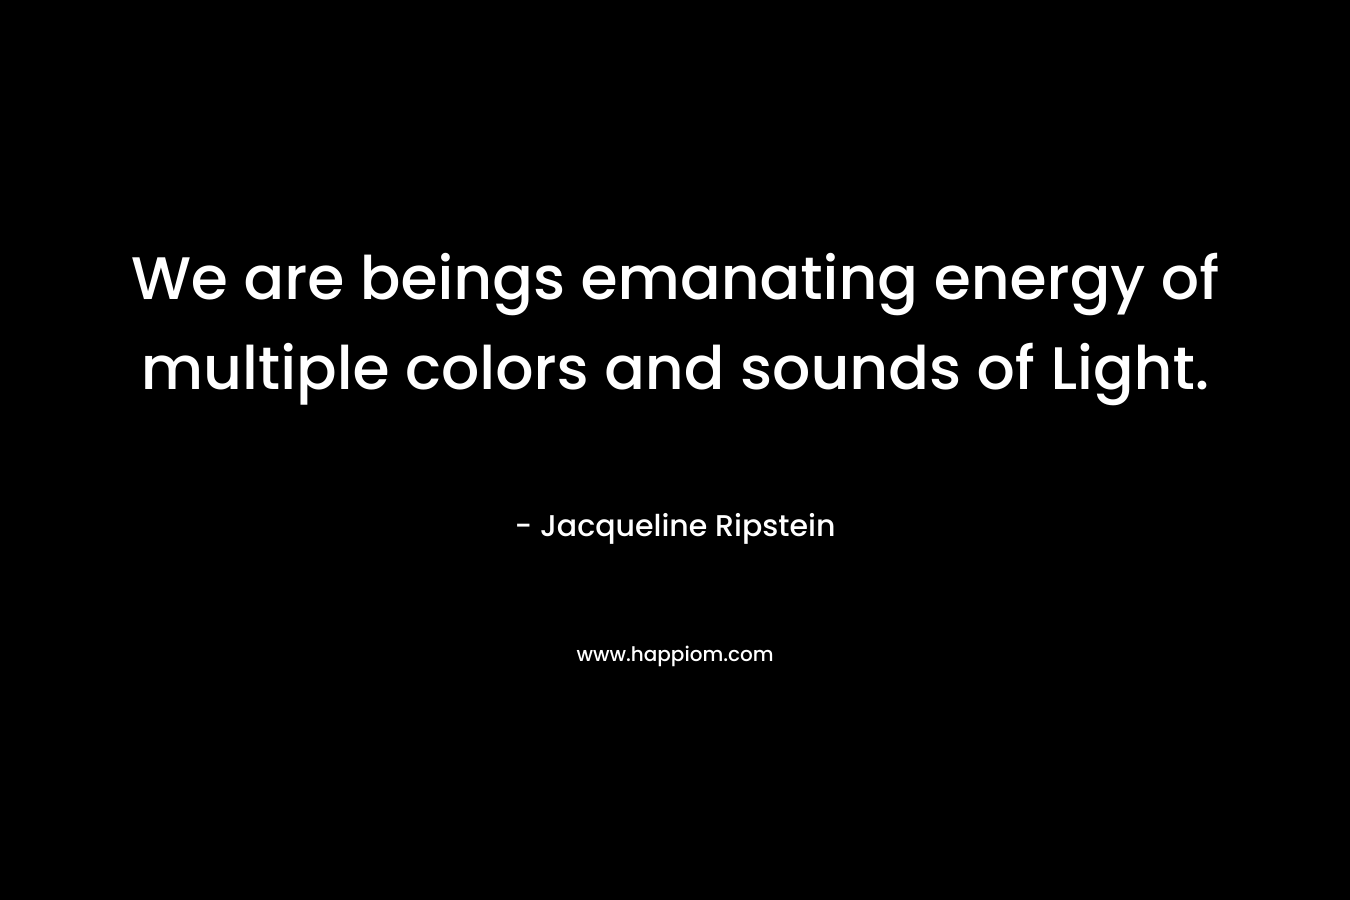 We are beings emanating energy of multiple colors and sounds of Light.